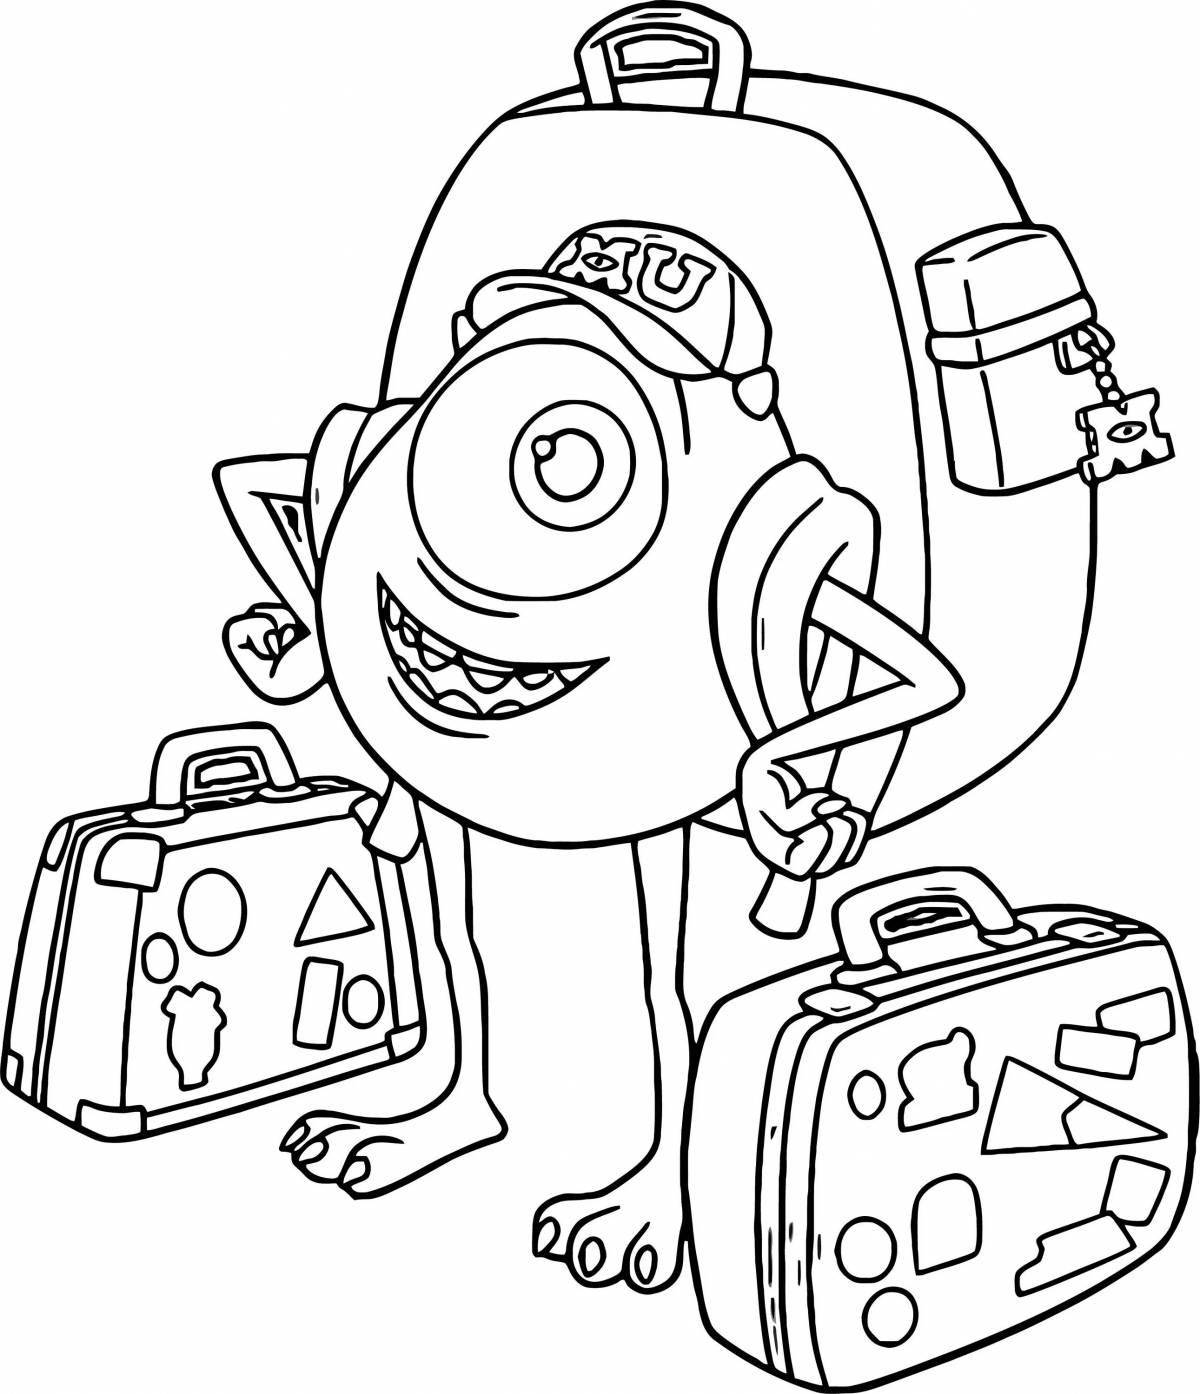 Grinning mike wazowski coloring page